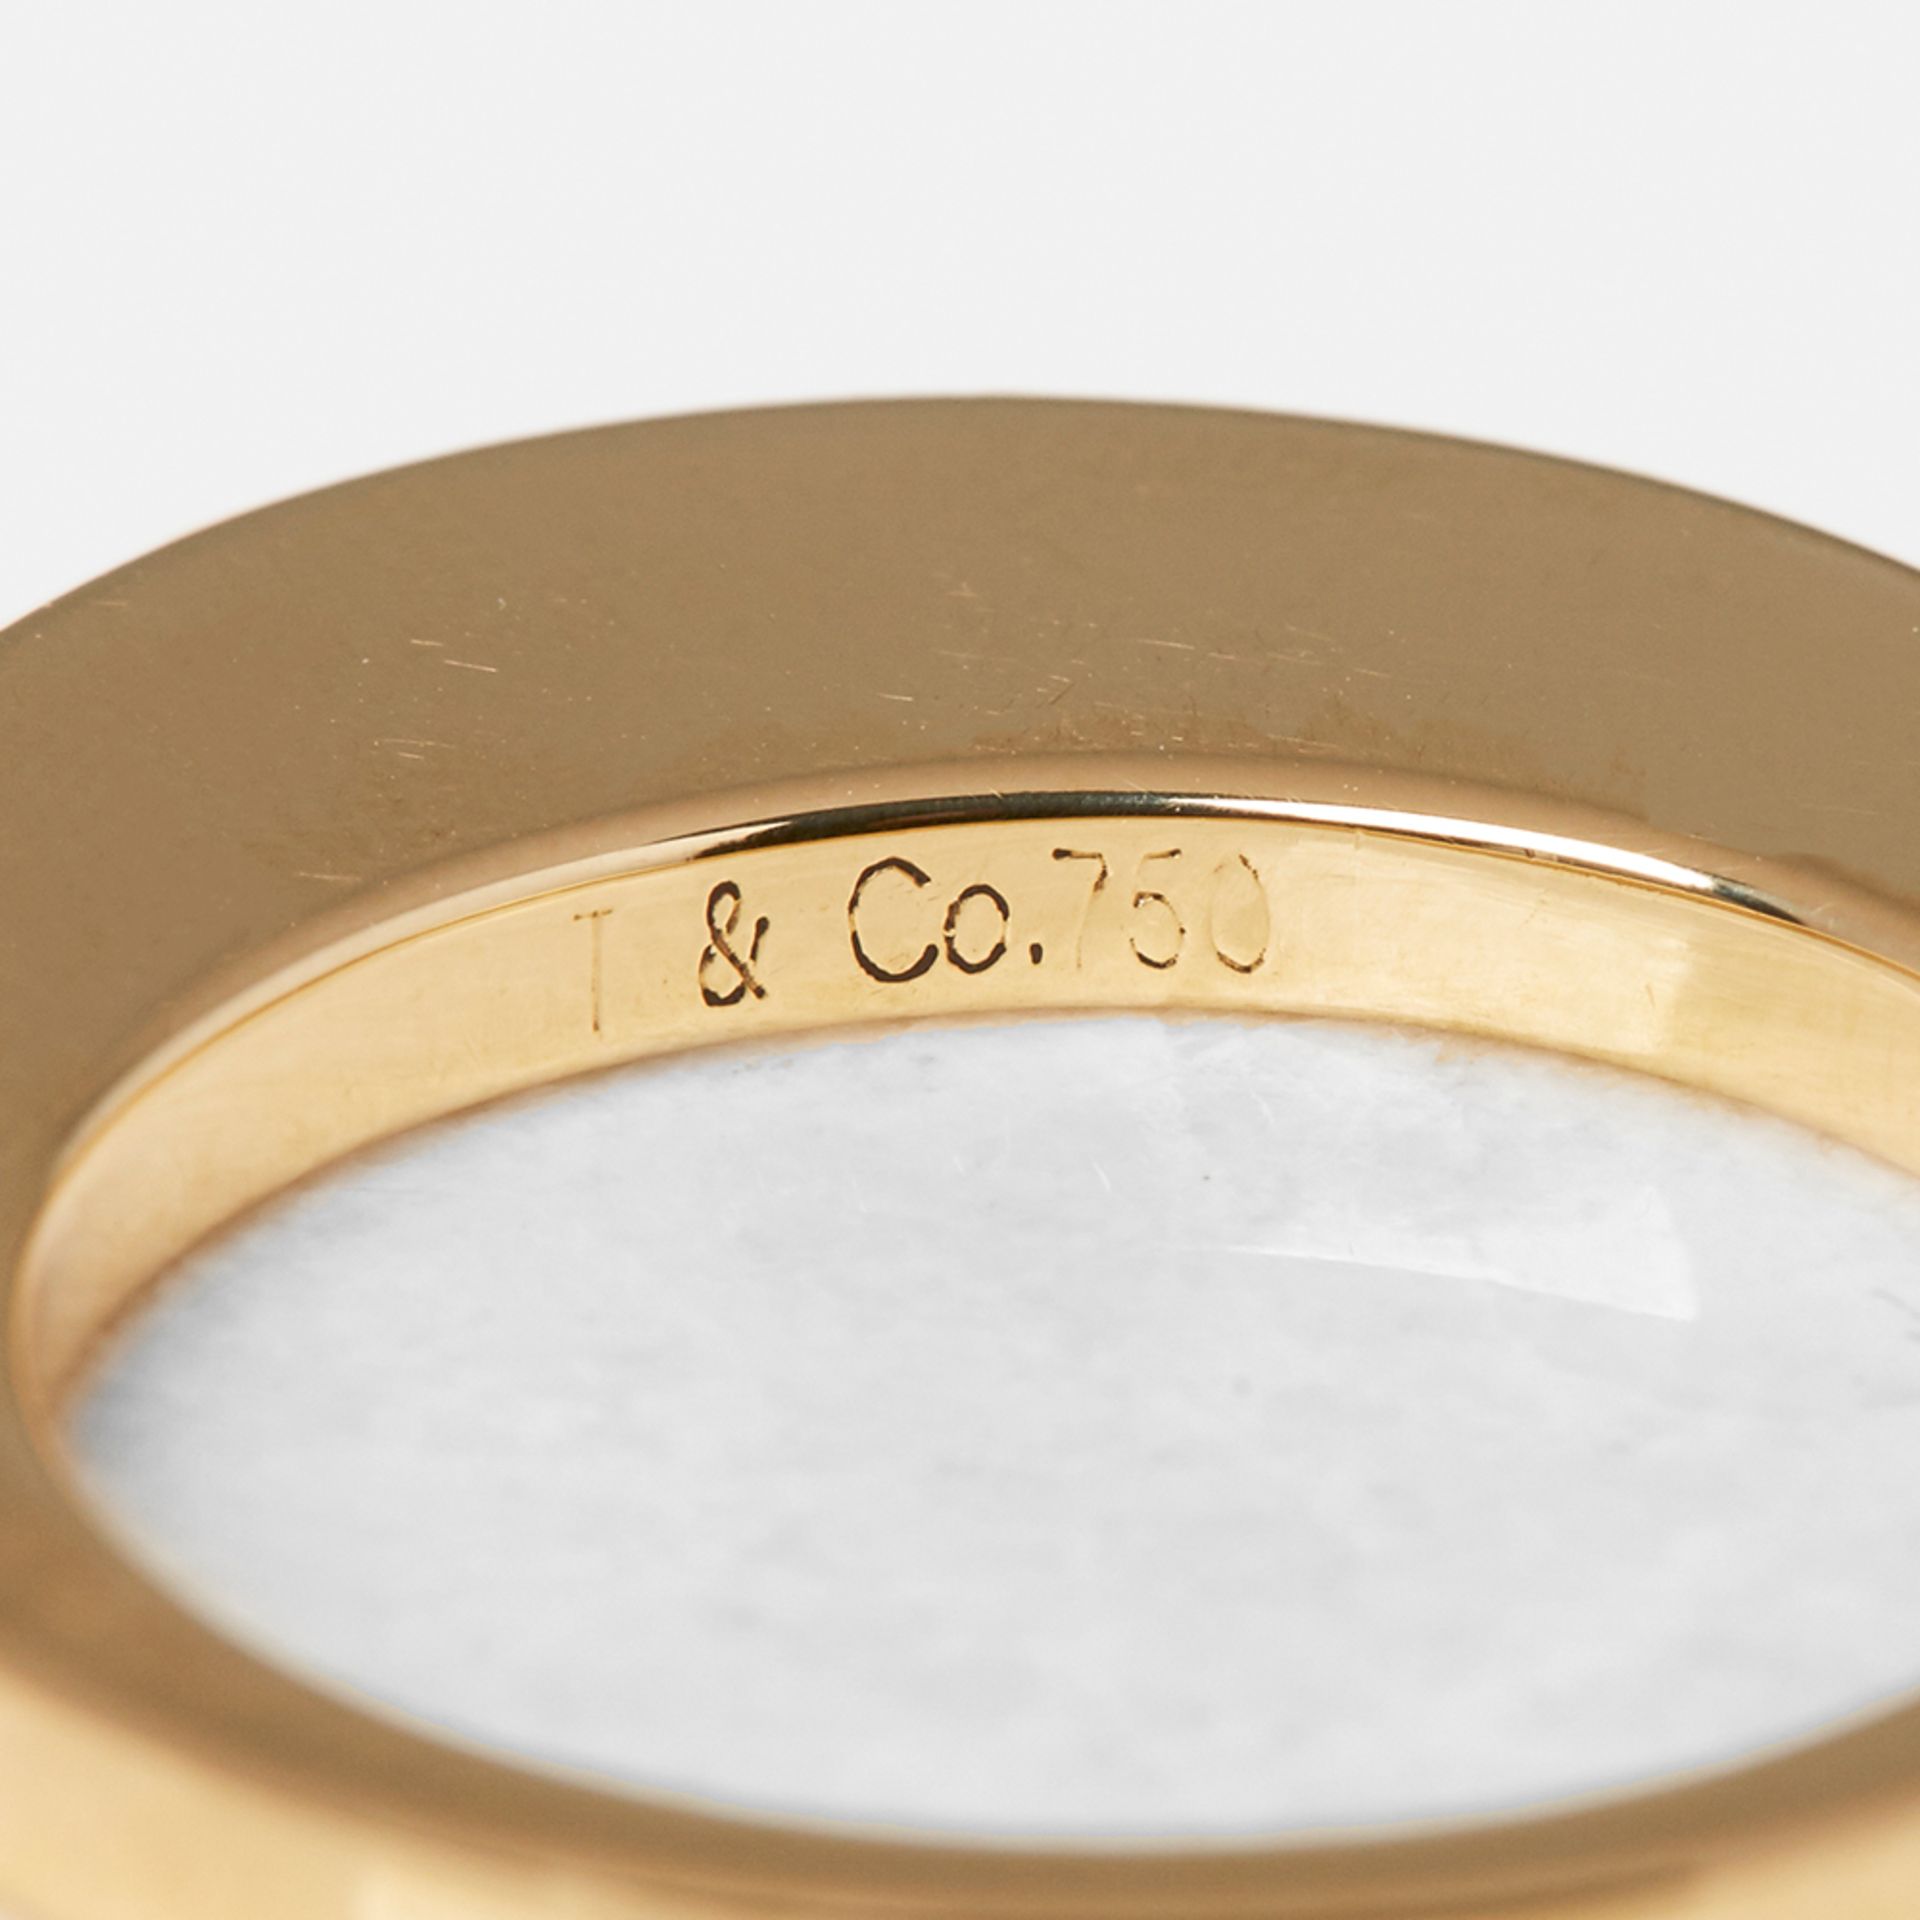 Tiffany & Co. 18k White, Rose & Yellow Gold Stackable Rings - Image 8 of 11